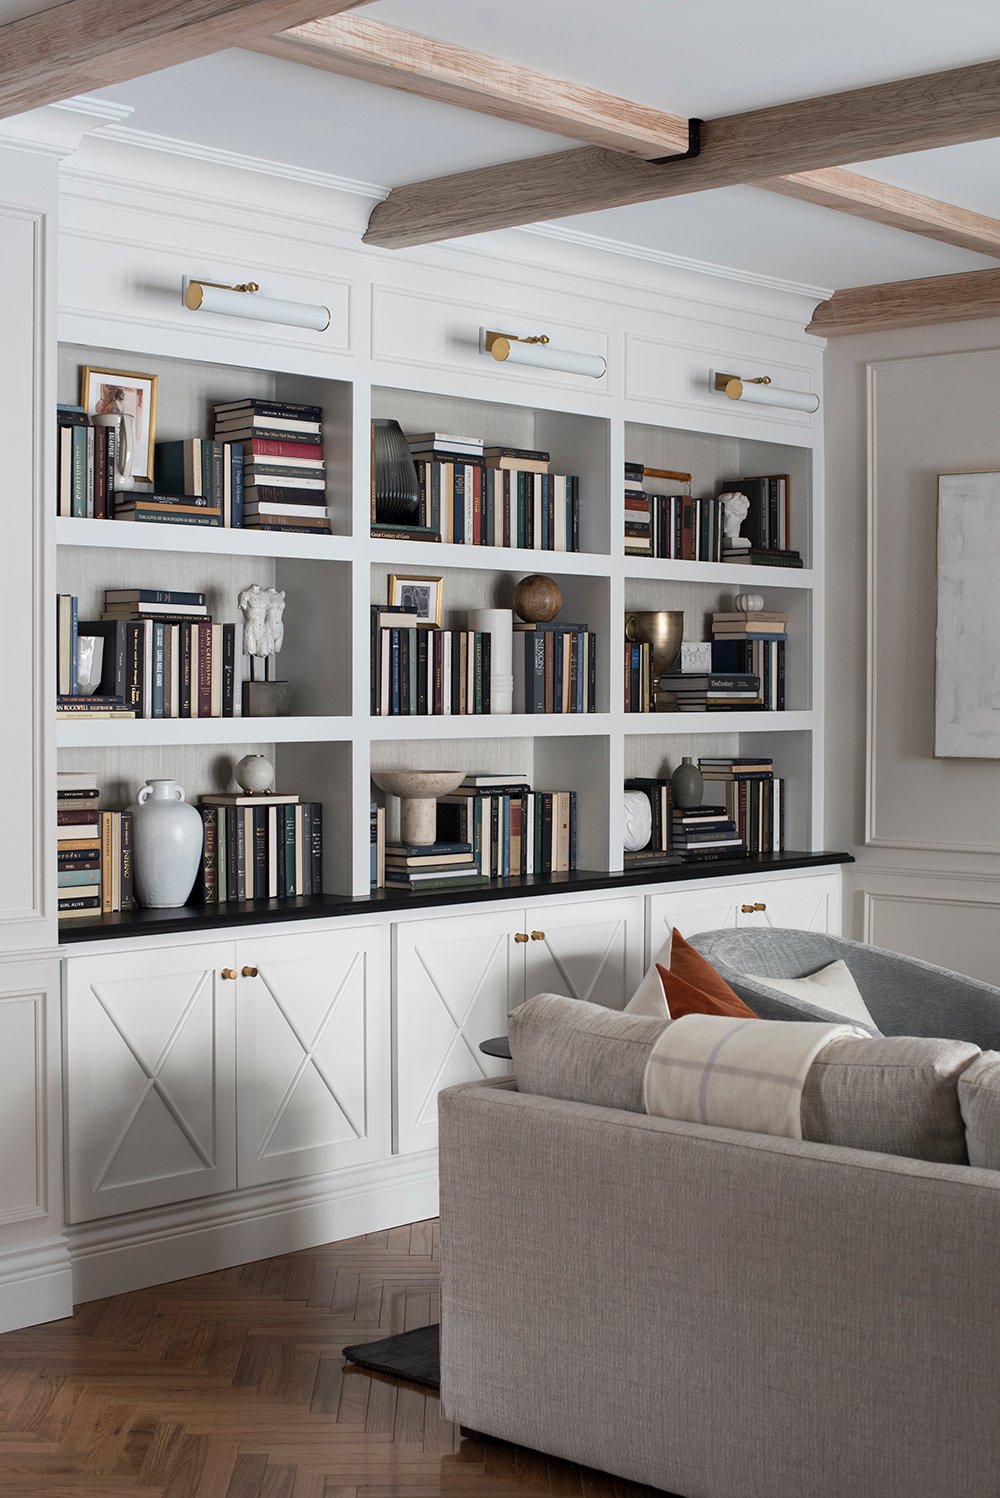 Design Discussion : Shelf Styling with Books - roomfortuesday.com